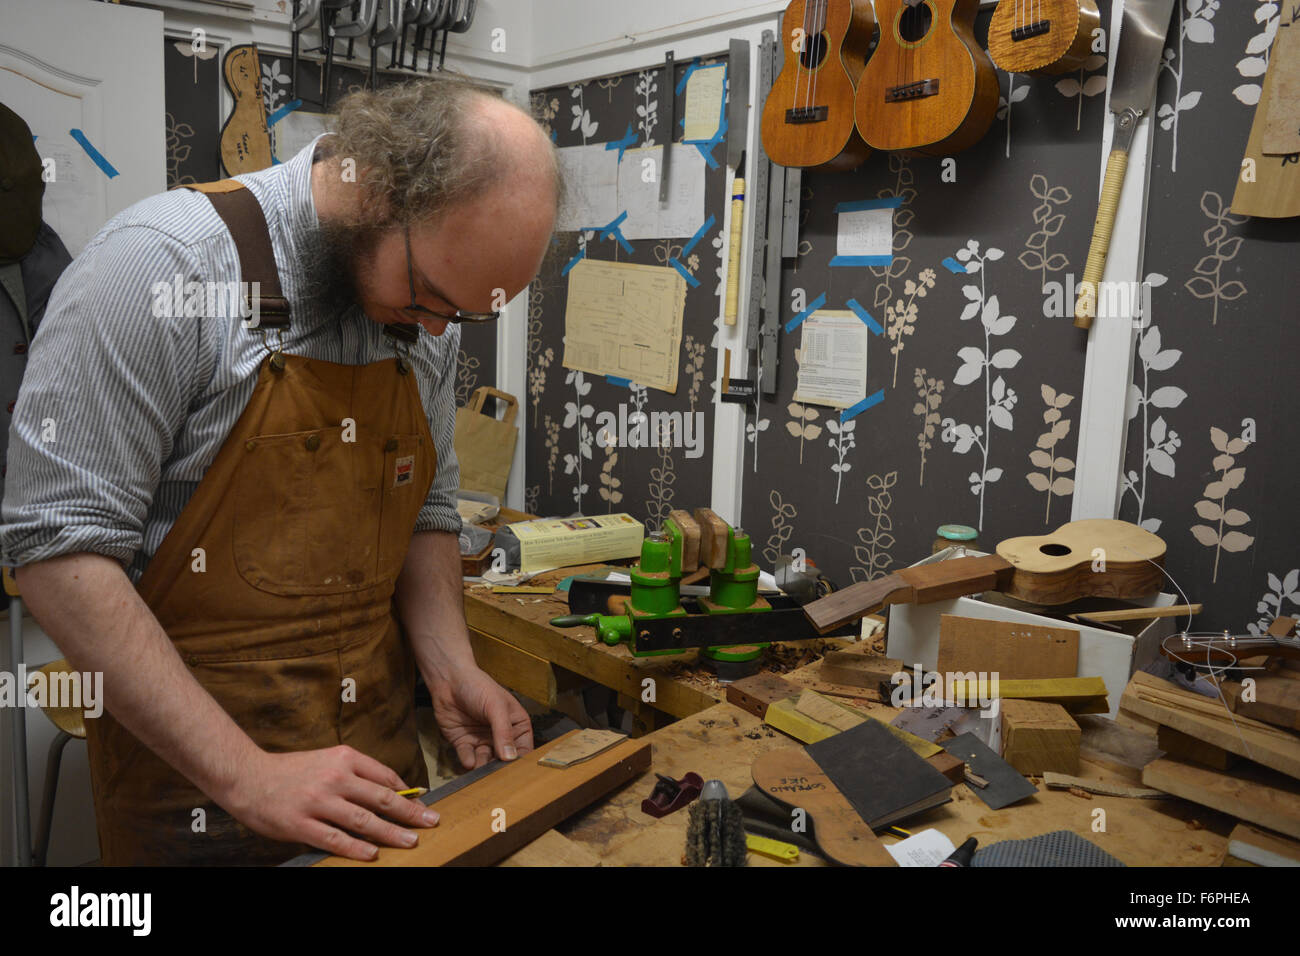 Luthier, Liam Kirby, in his ukulele and guitar workshop. Wunderkammer Musical Instrument Co. Bristol, England Stock Photo